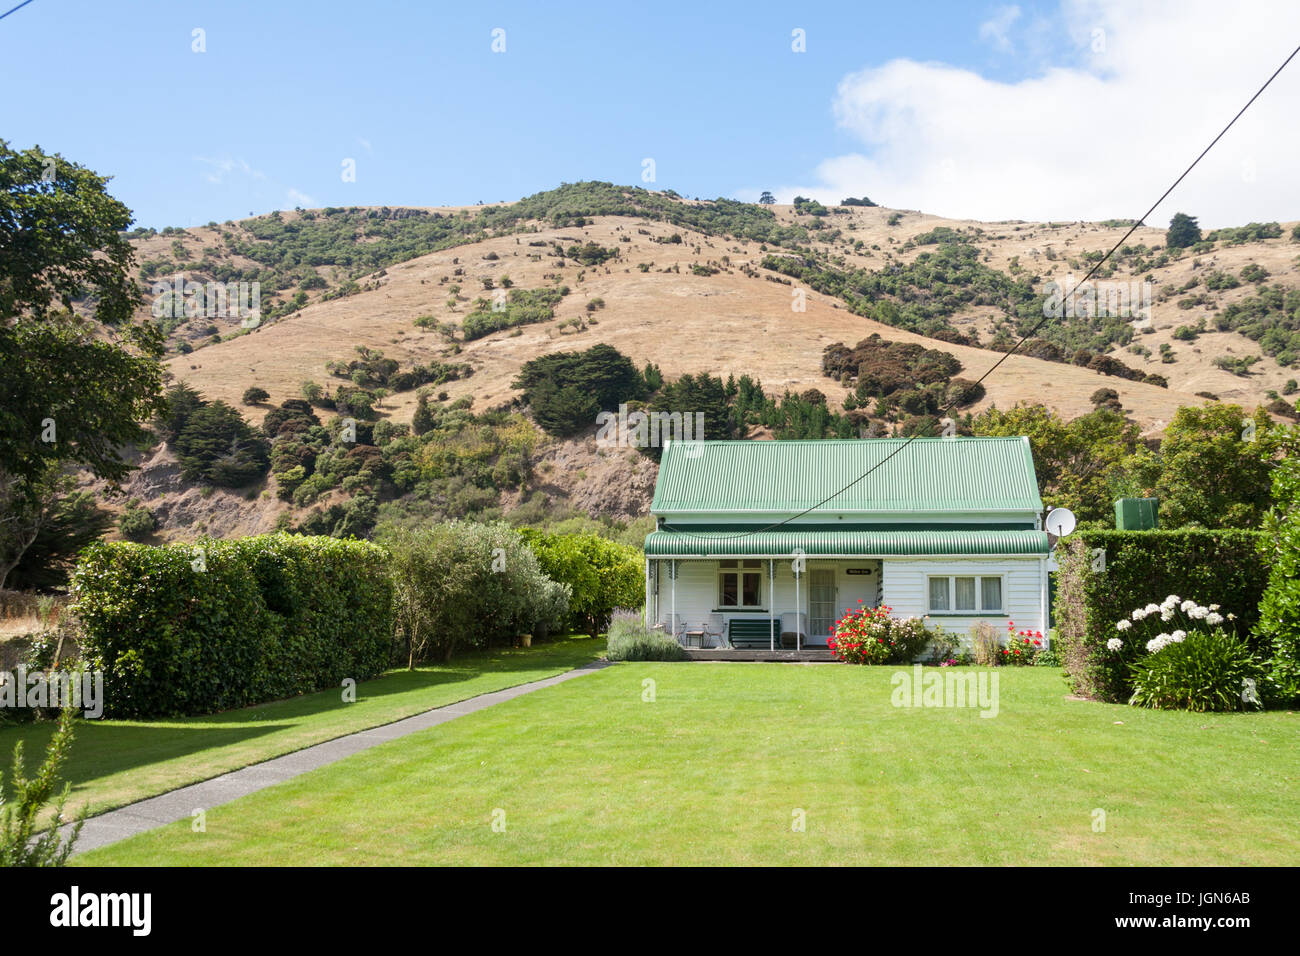 Typical house with grass lawn and garden in Okains Bay, South Island, New Zealand Stock Photo